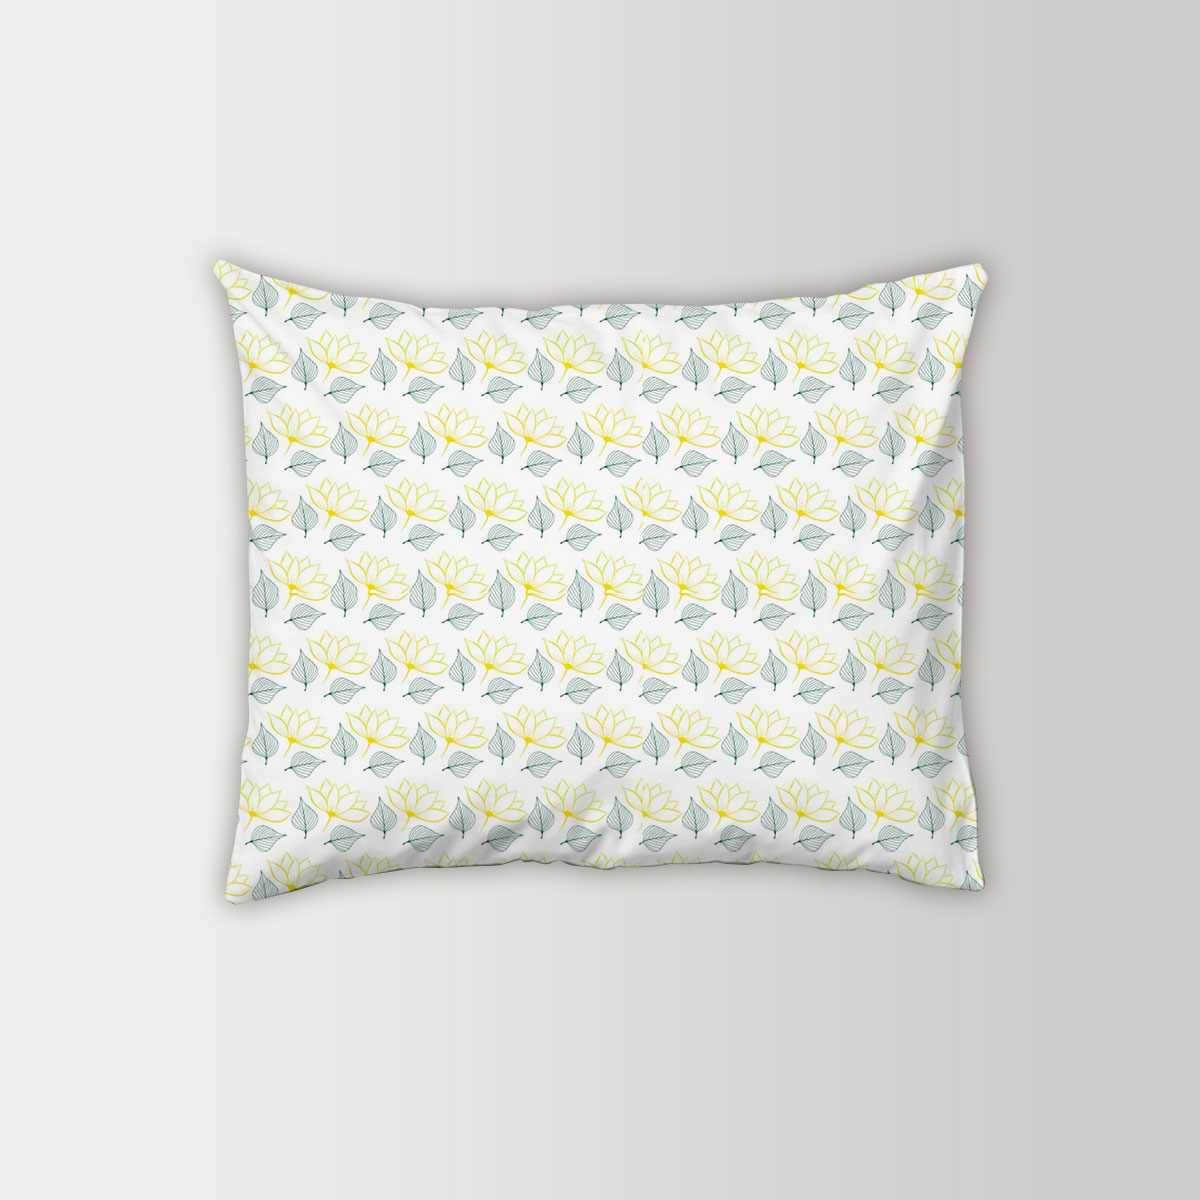 Magnolia With Leaves Seamless Pattern Pillow Case